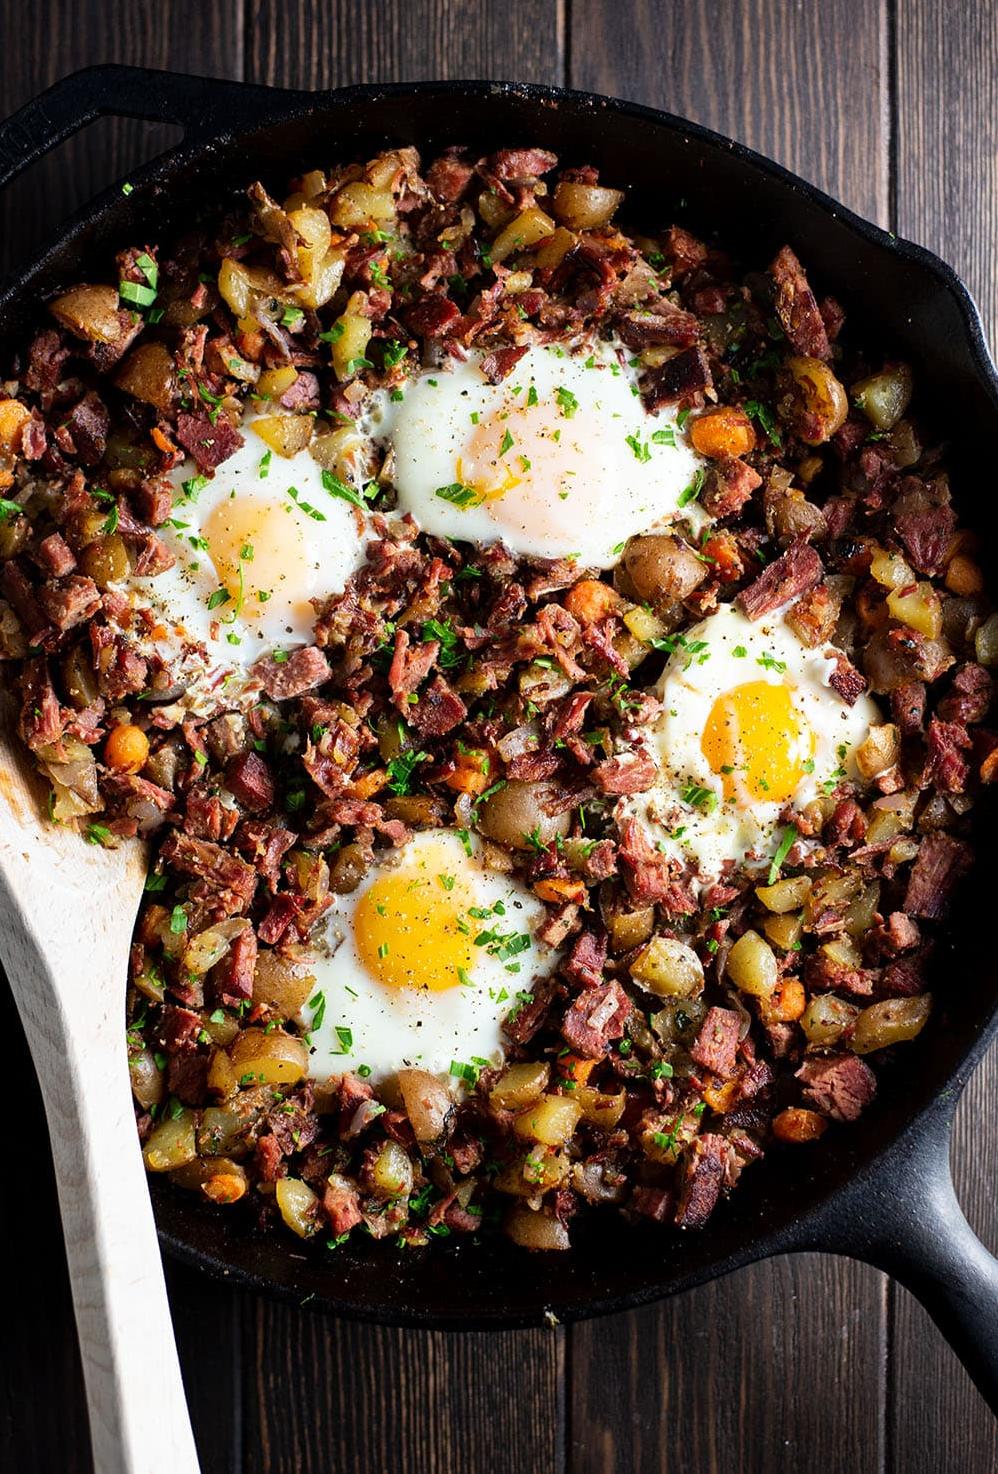  Enjoy this traditional Irish-American breakfast for a hearty start to your day.